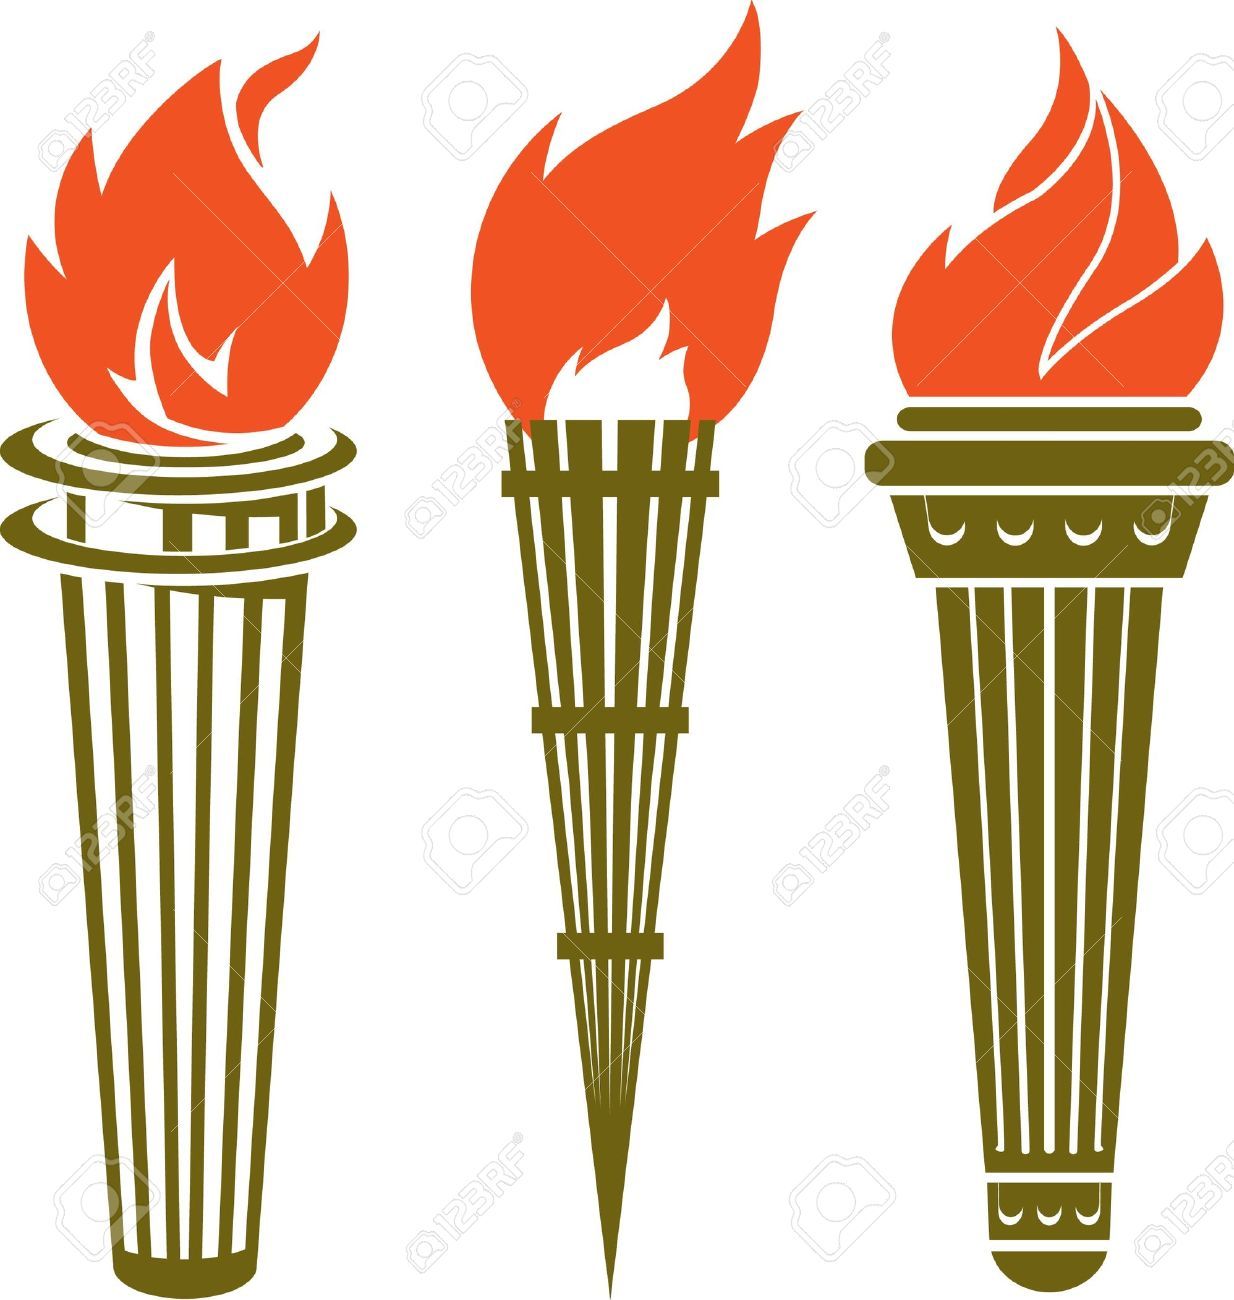 Torch Stock Vector Illustration And Royalty Free Torch